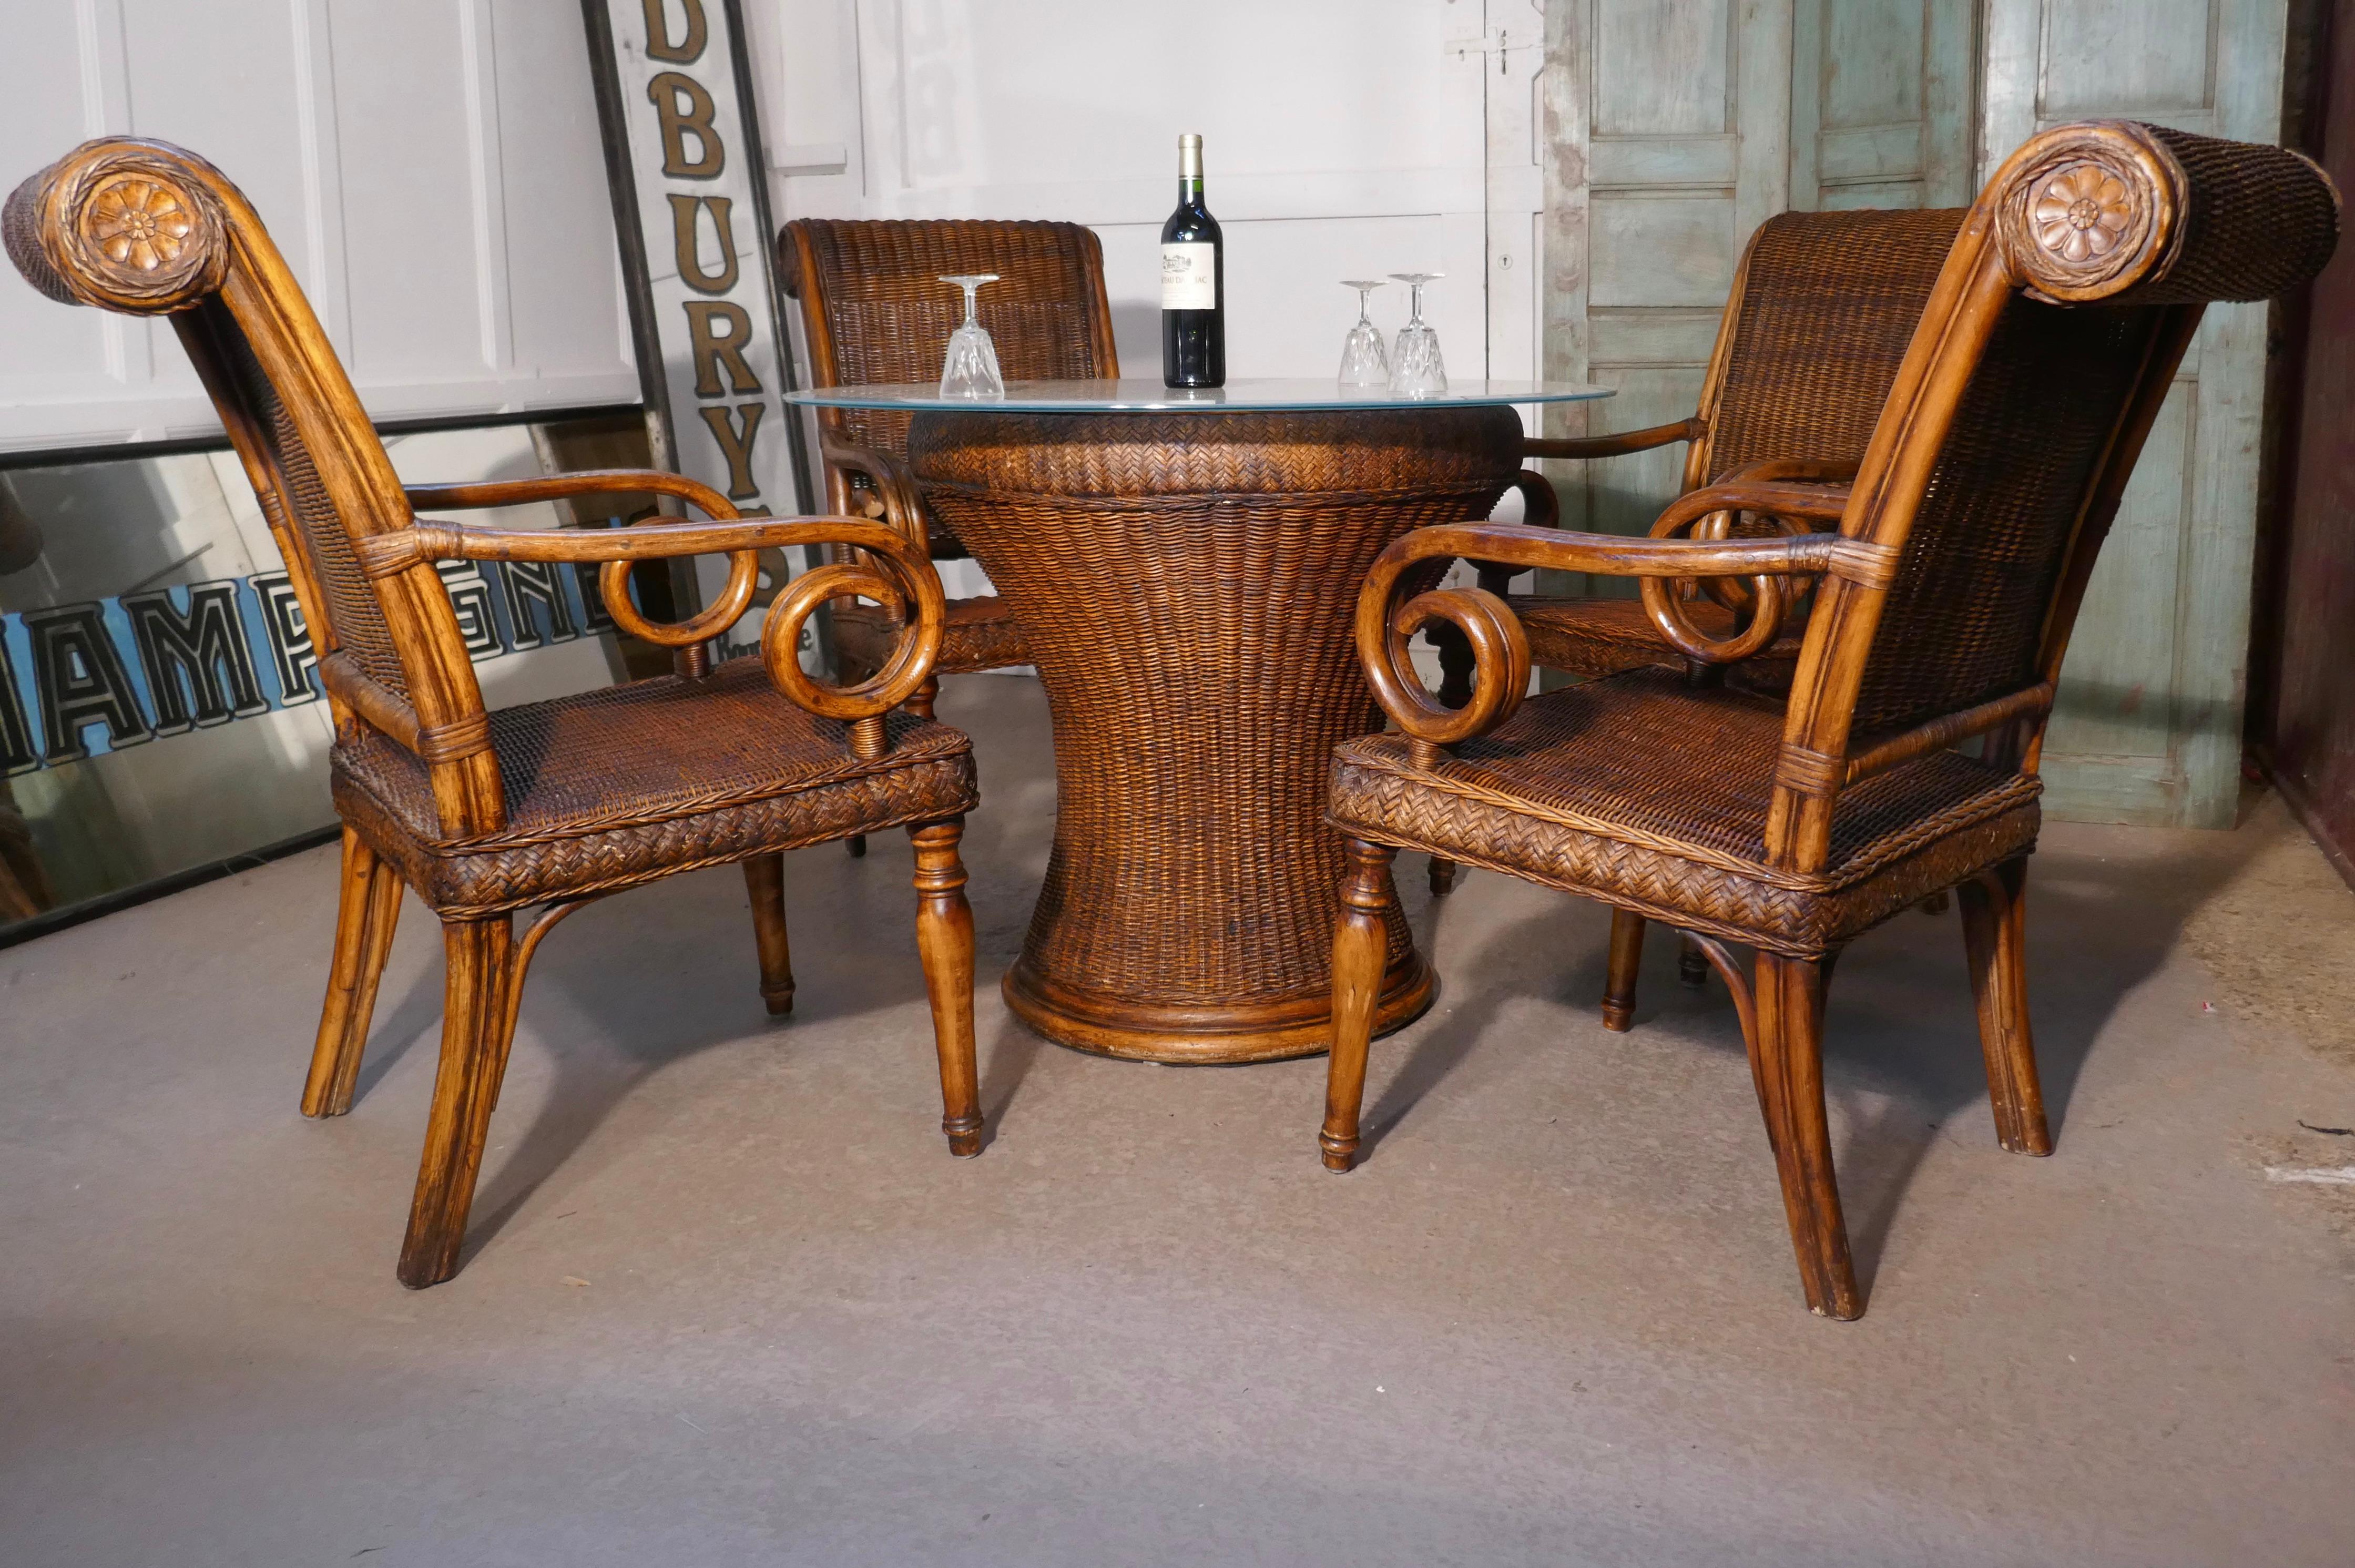 Superb plantation or bistro set of 4 cane and bentwood armchairs and table

The round table is very stylish and the heavy bentwood chairs have scroll arms and roll top backs
A wonderful set dating from the 20th century, this is a heavy quality